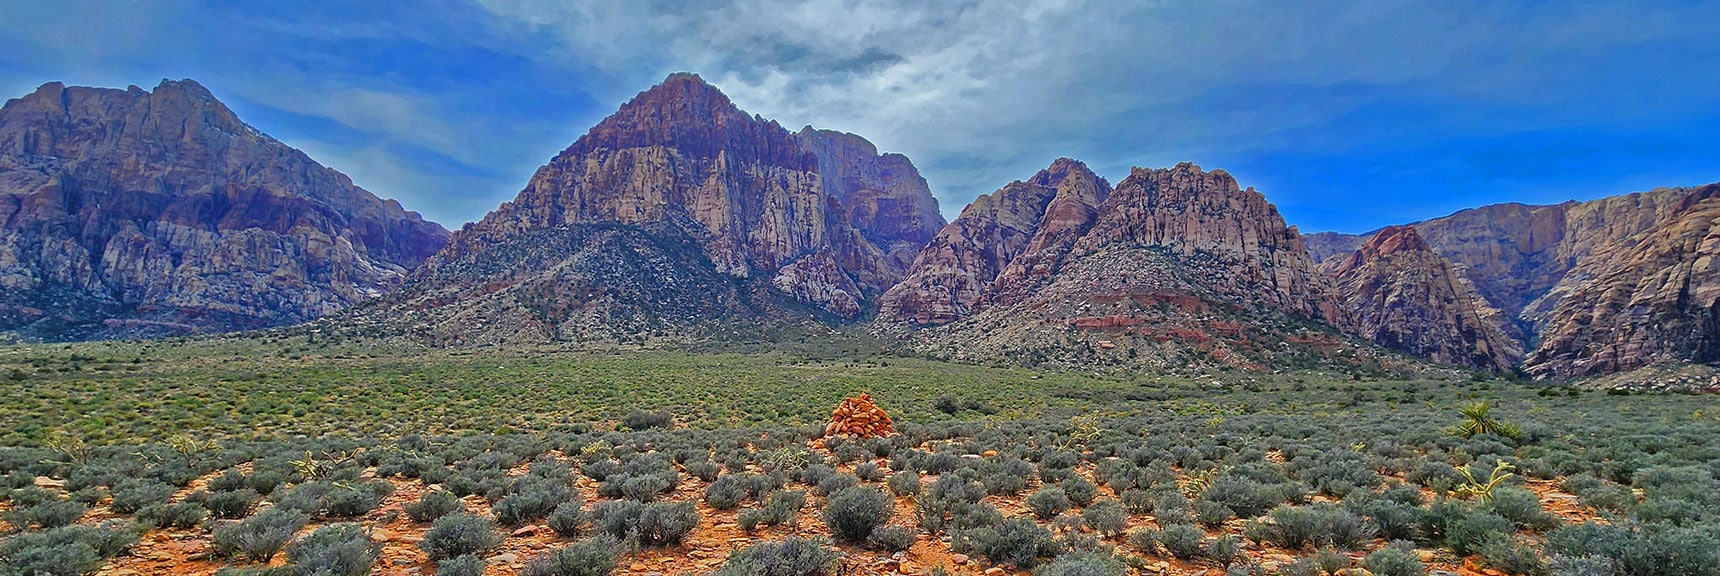 Huge Cairn Appears to Mark Spot Near the NW End of the Pine Creek Canyon Road | Historic Roads in Red Rock Canyon, Nevada | David Smith | LasVegasAreaTrails.com